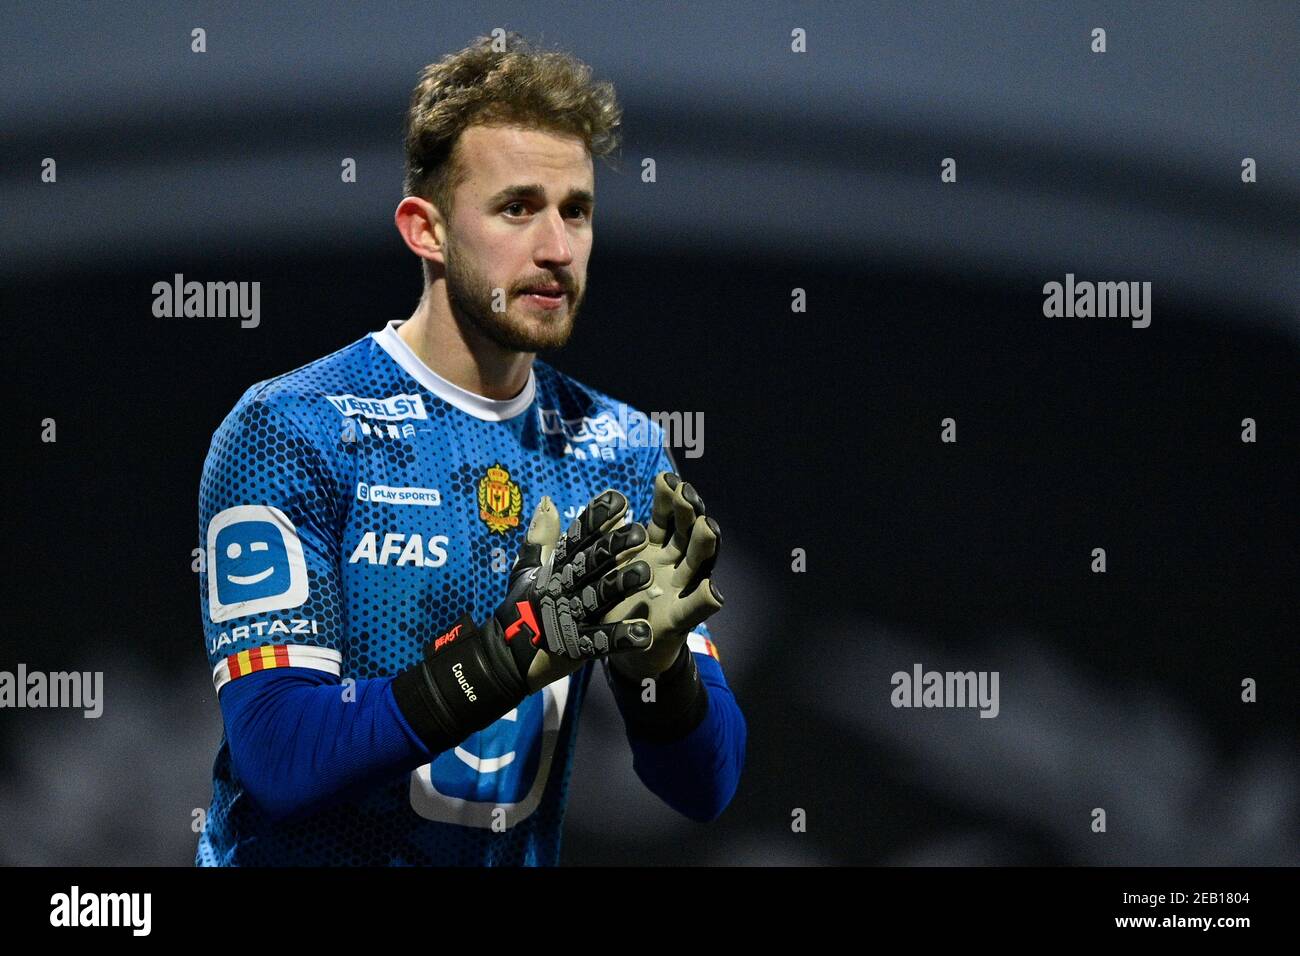 Mechelen S Gaetan Coucke Pictured During A Soccer Game Between K Beerschot Va And Kv Mechelen Both From 1a First Division Thursday 11 February 2021 Stock Photo Alamy